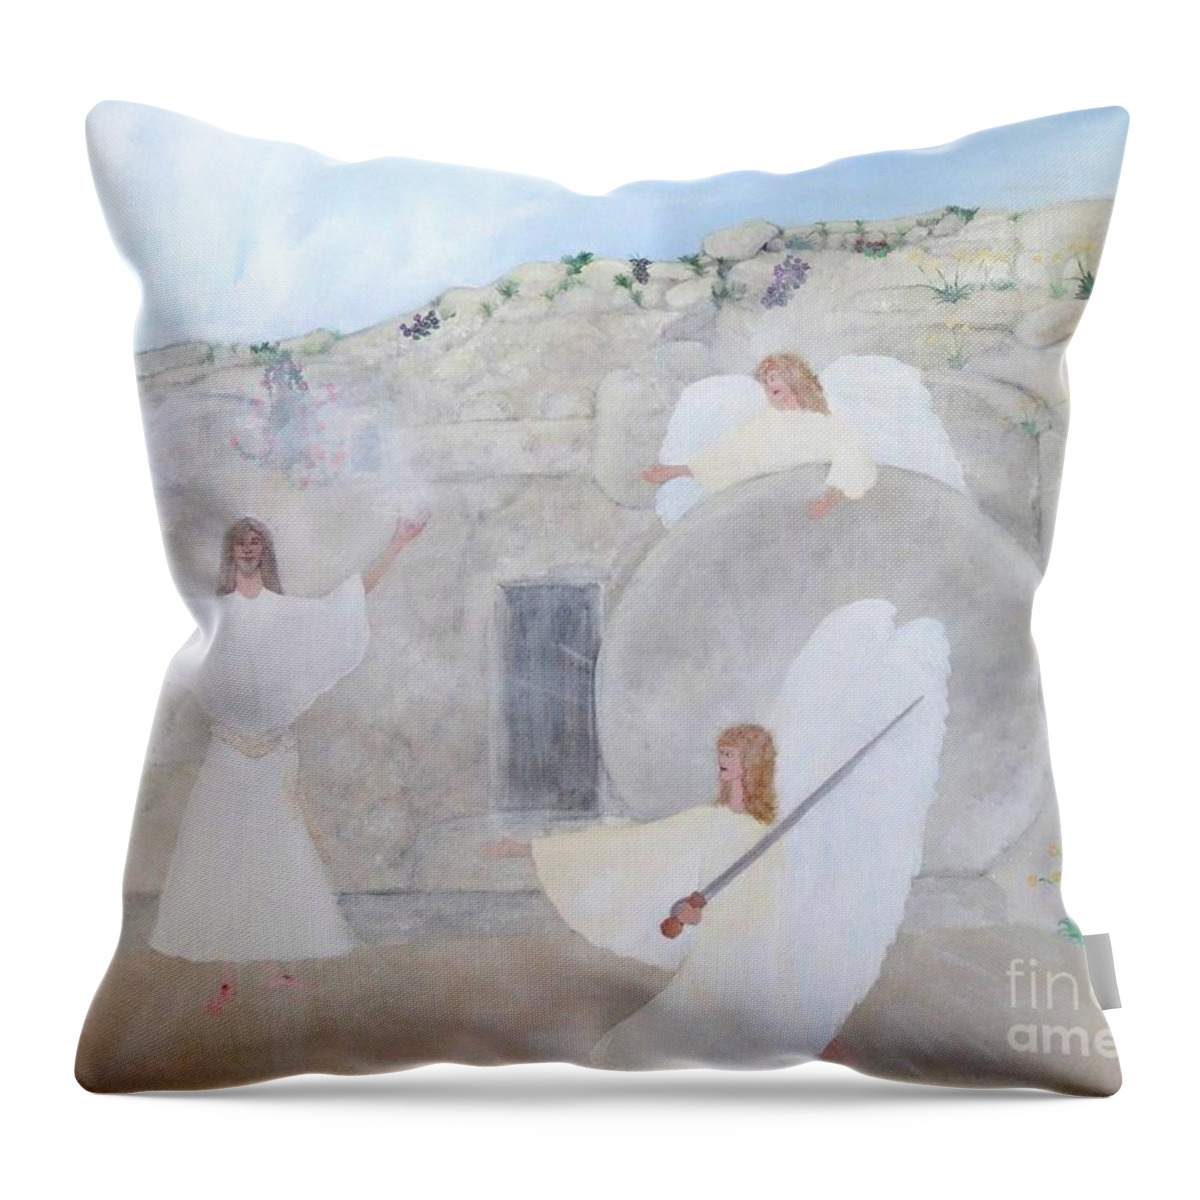 The Resurrection Of Jesus Christ Throw Pillow featuring the painting The Resurrection by Karen Jane Jones